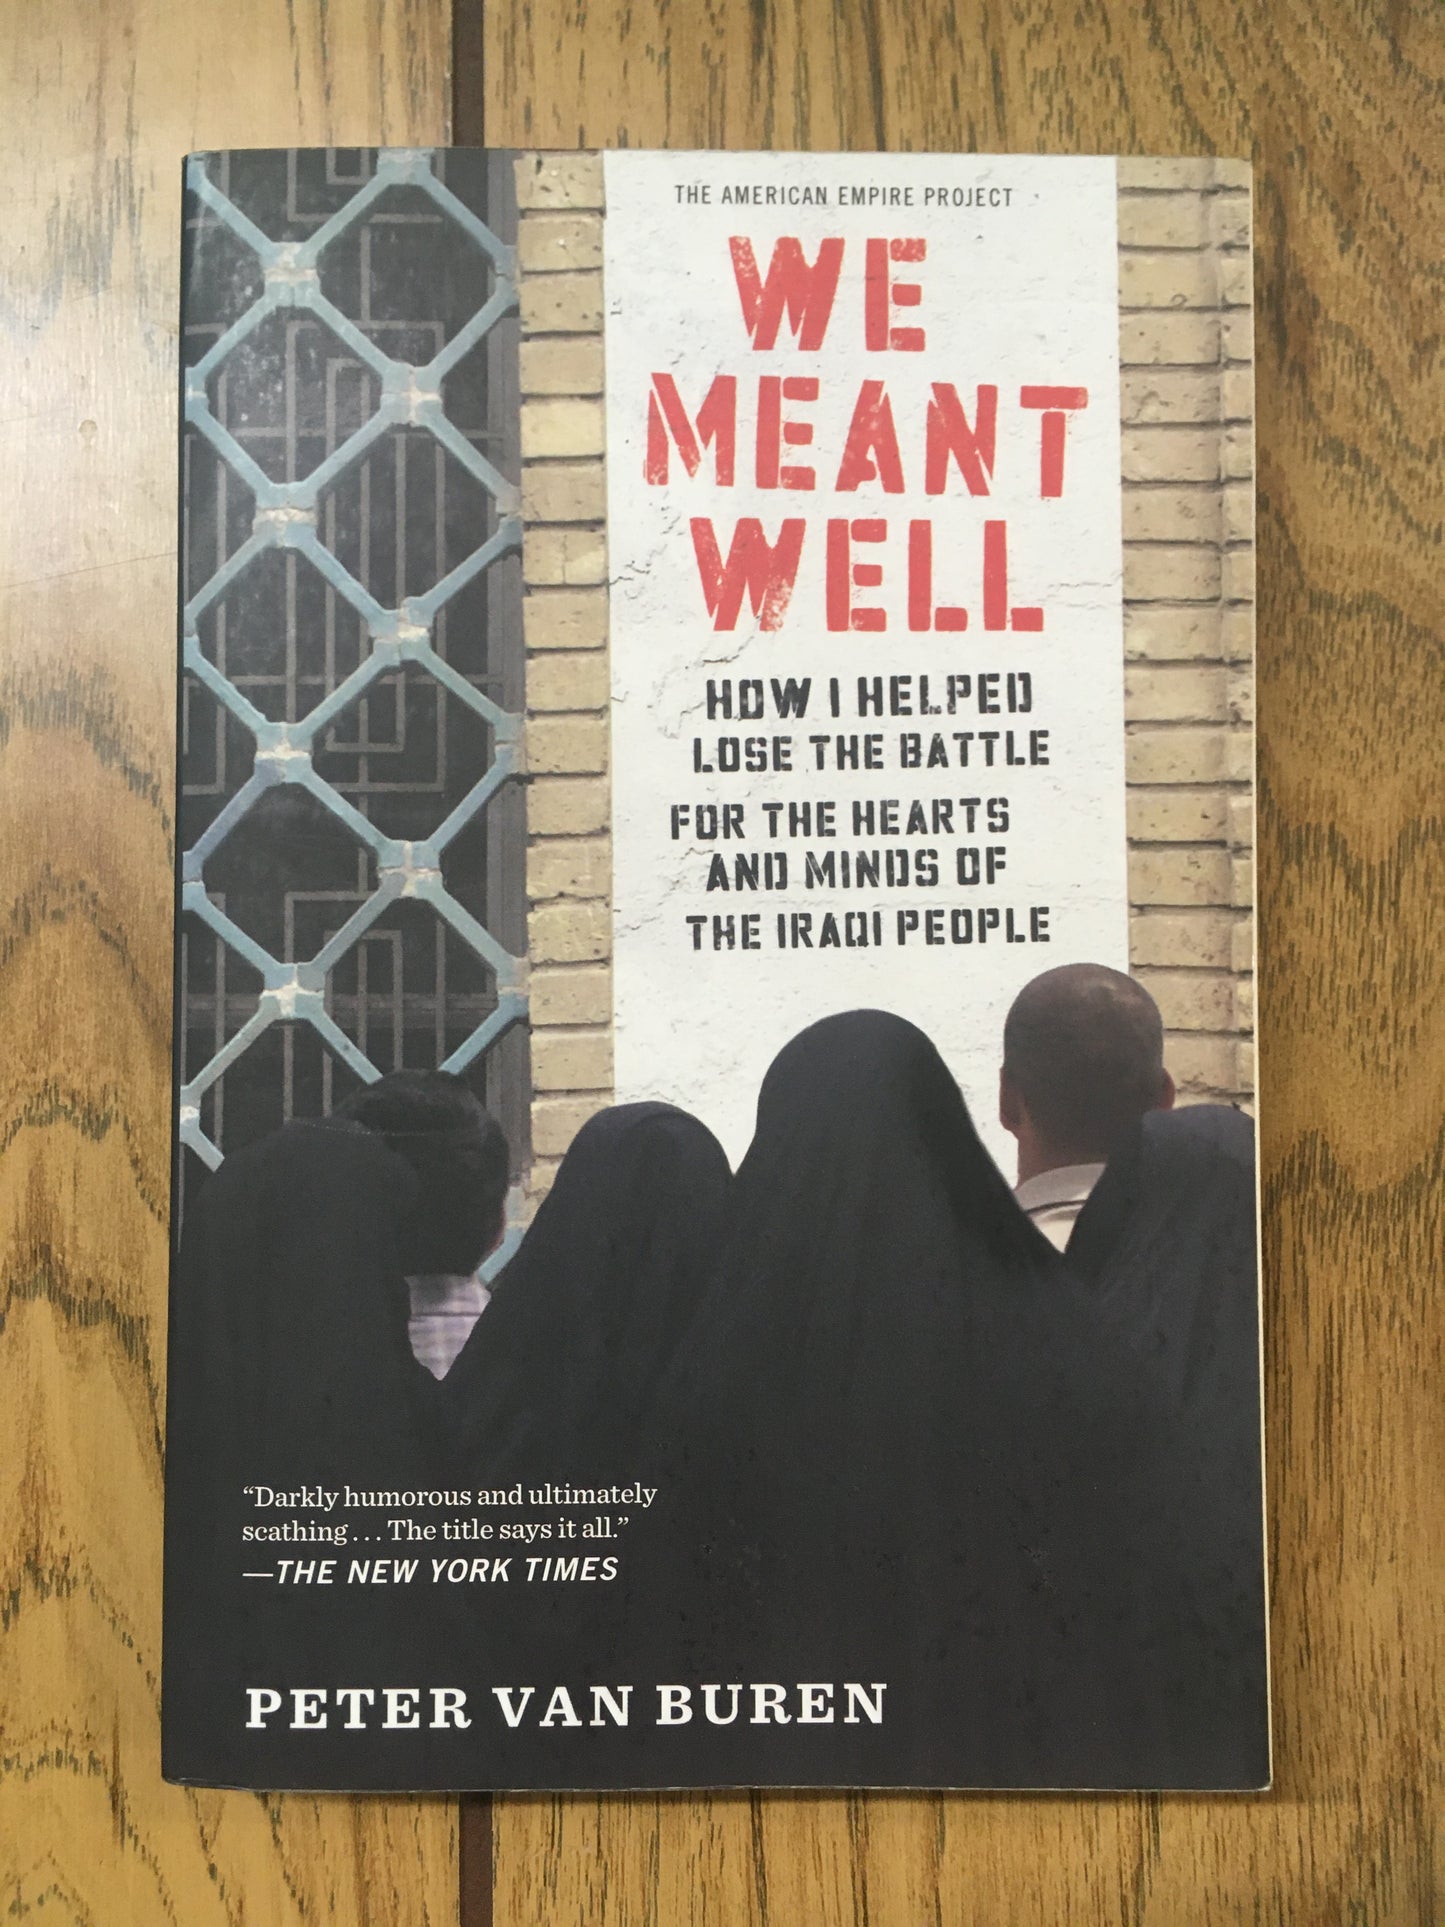 We Meant Well: How I Helped Lose the Battle for the Hearts and Minds of the Iraqi People